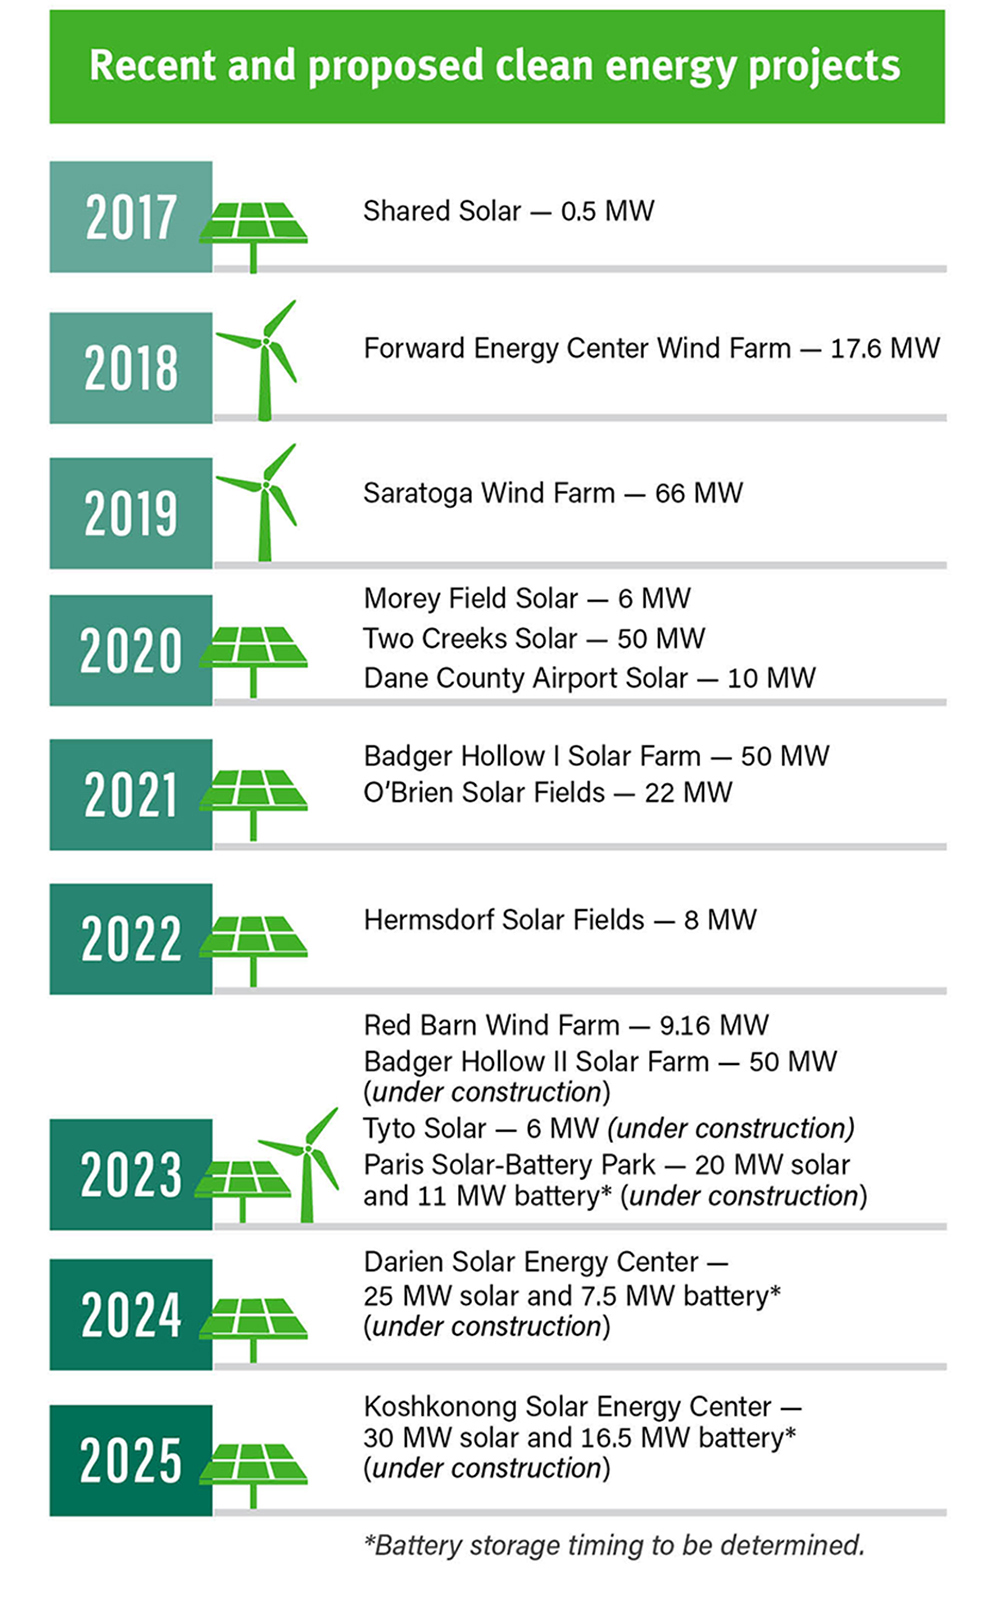 MGE recent and proposed clean energy projects